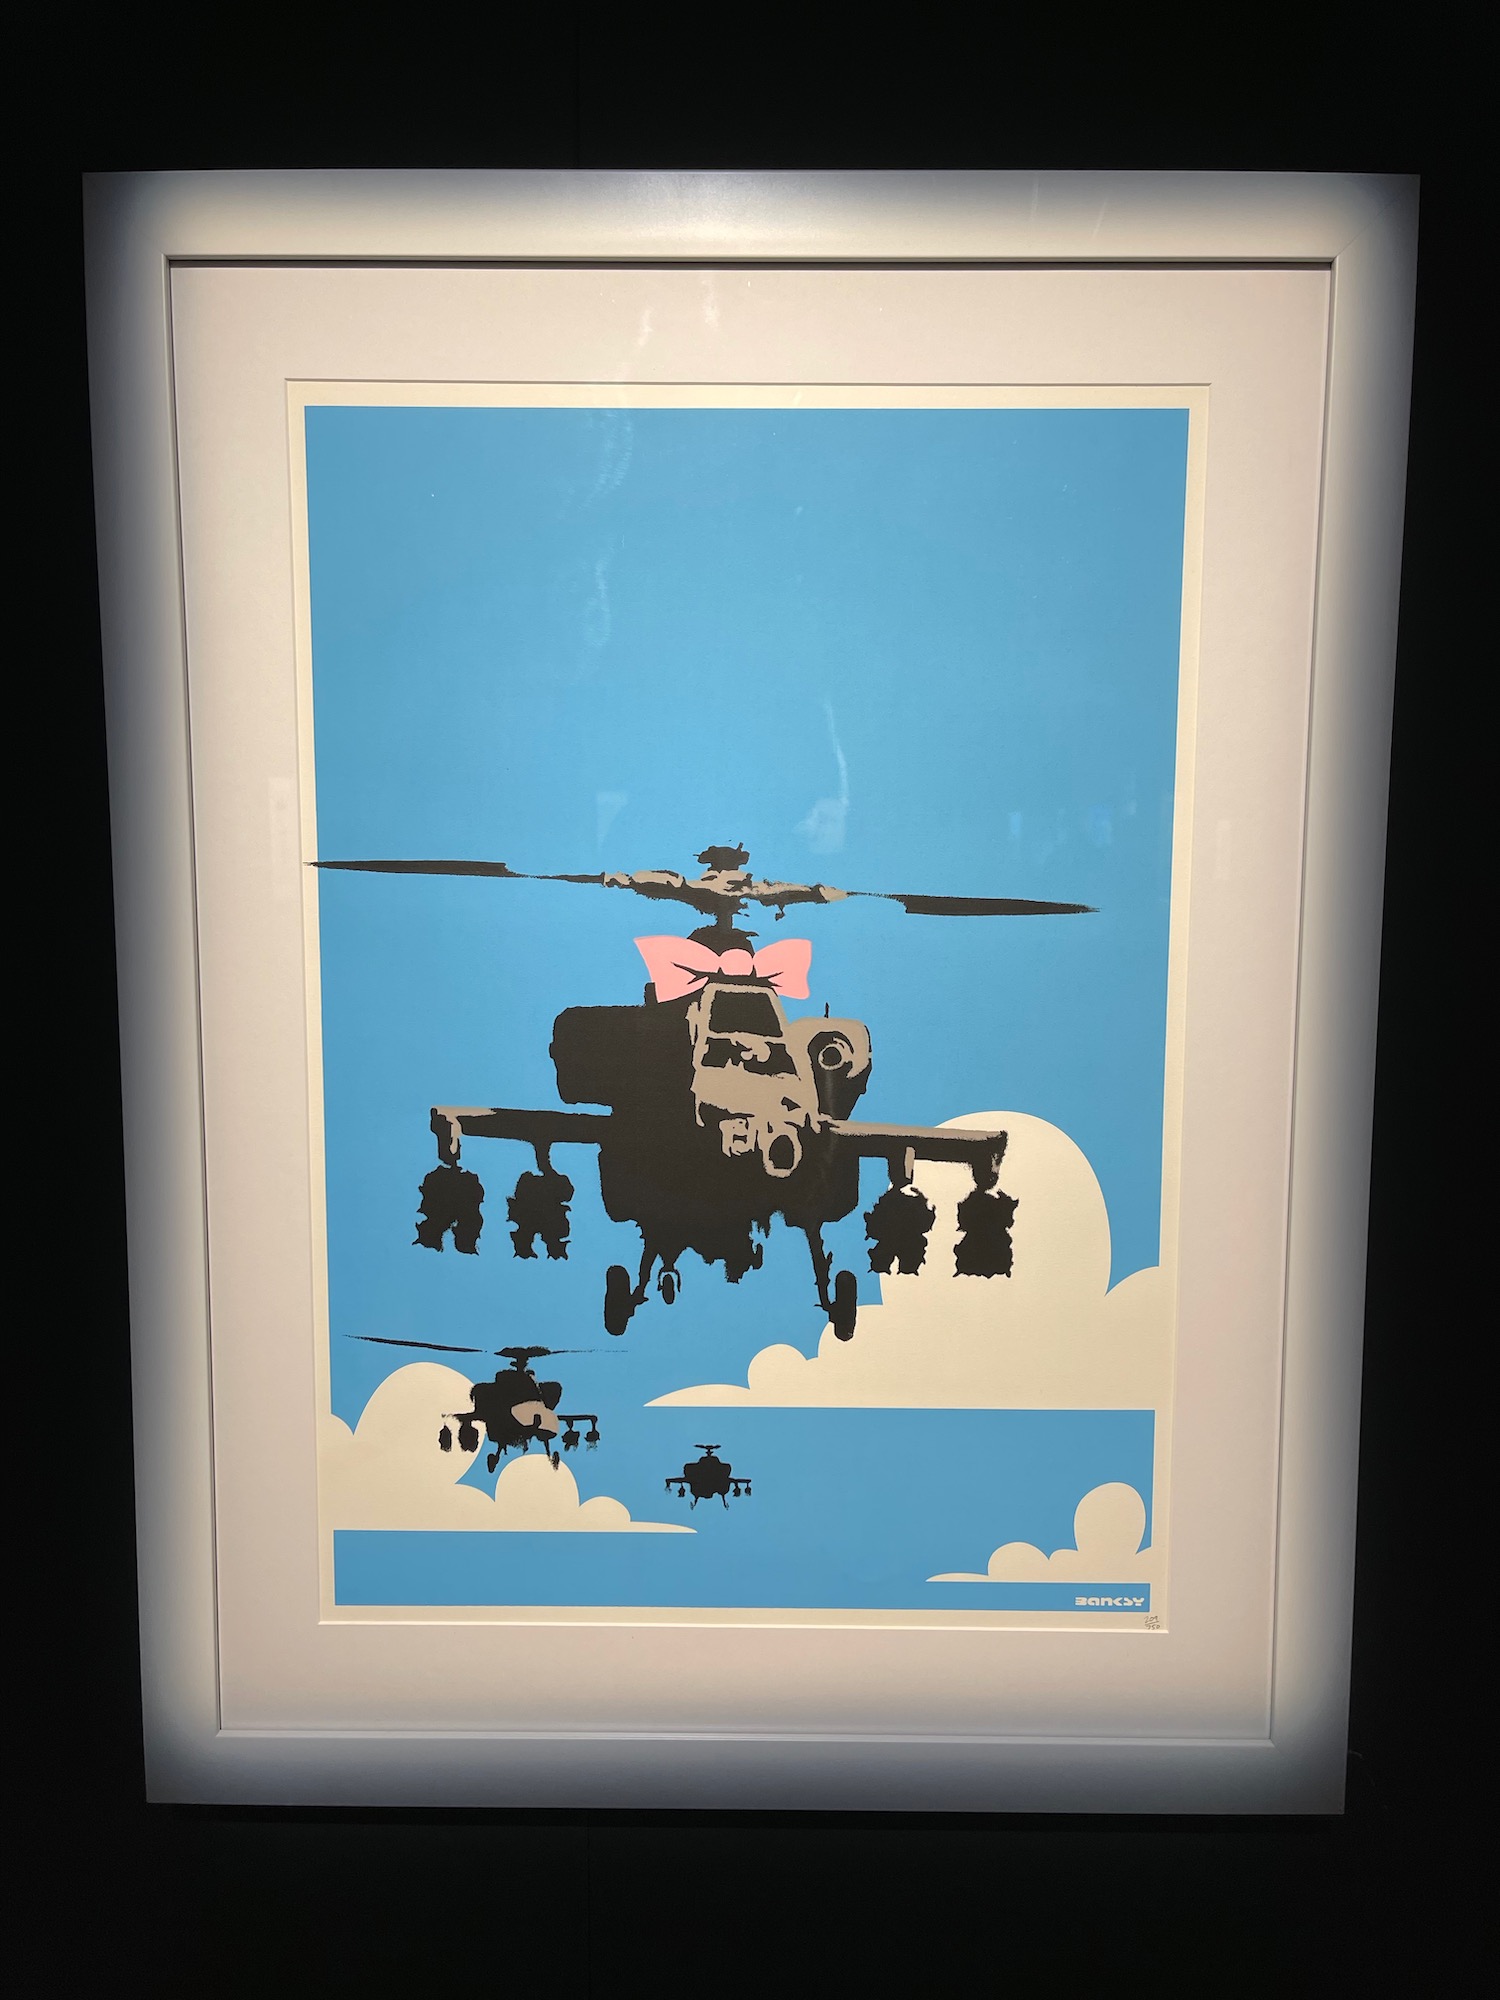 a framed picture of a helicopter